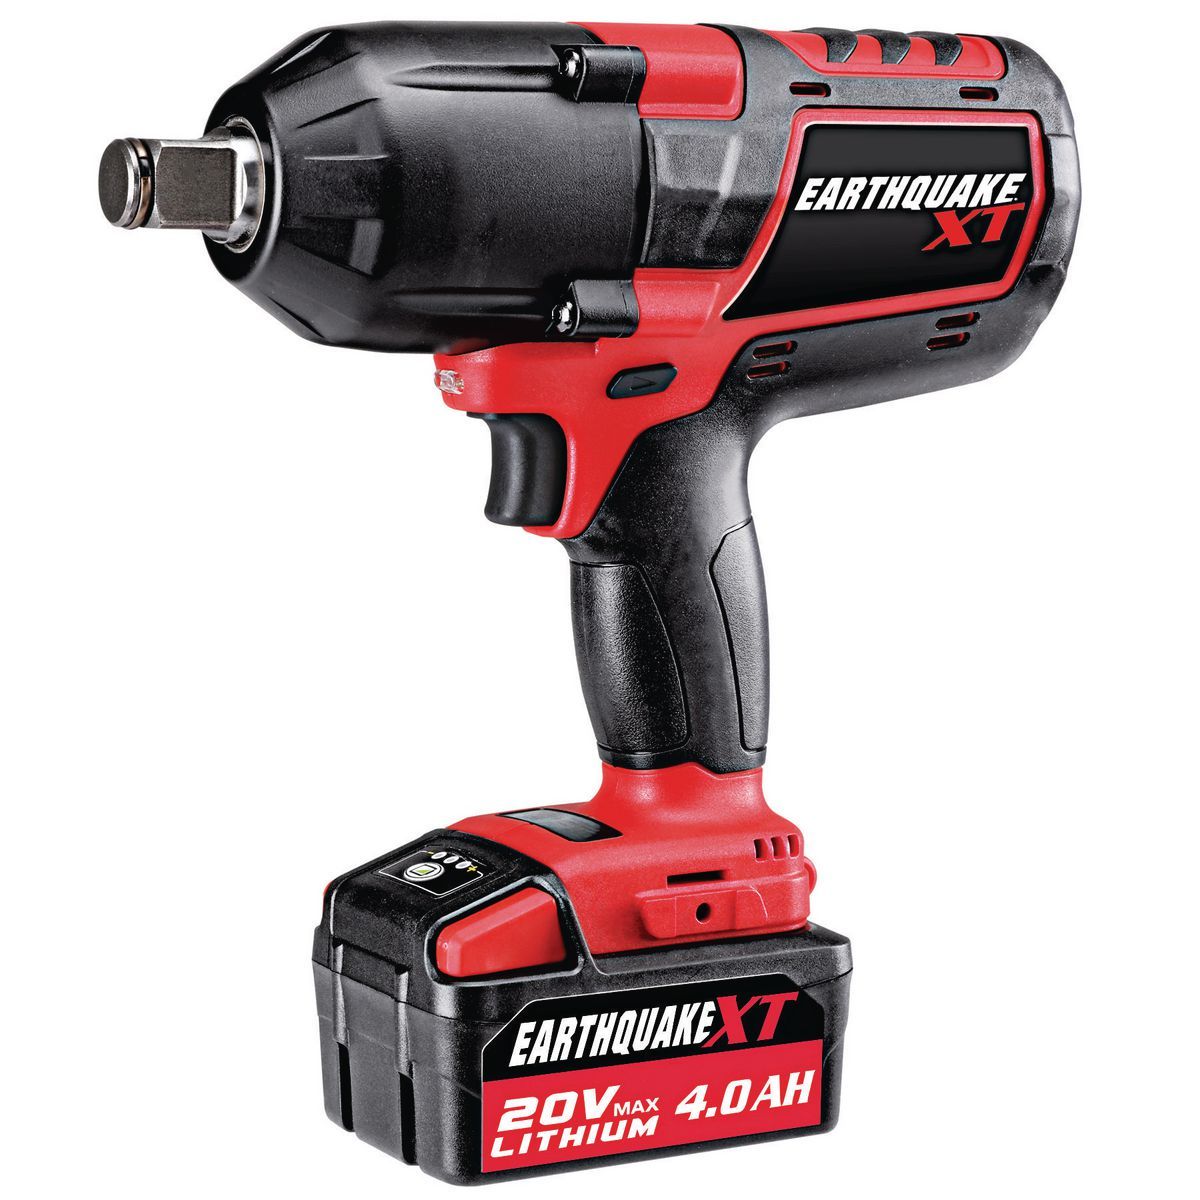 EARTHQUAKE XT 20V Cordless 3/4 in. Xtreme Torque Impact Wrench Kit with 4.0 Ah Battery, Fast Charger and Case